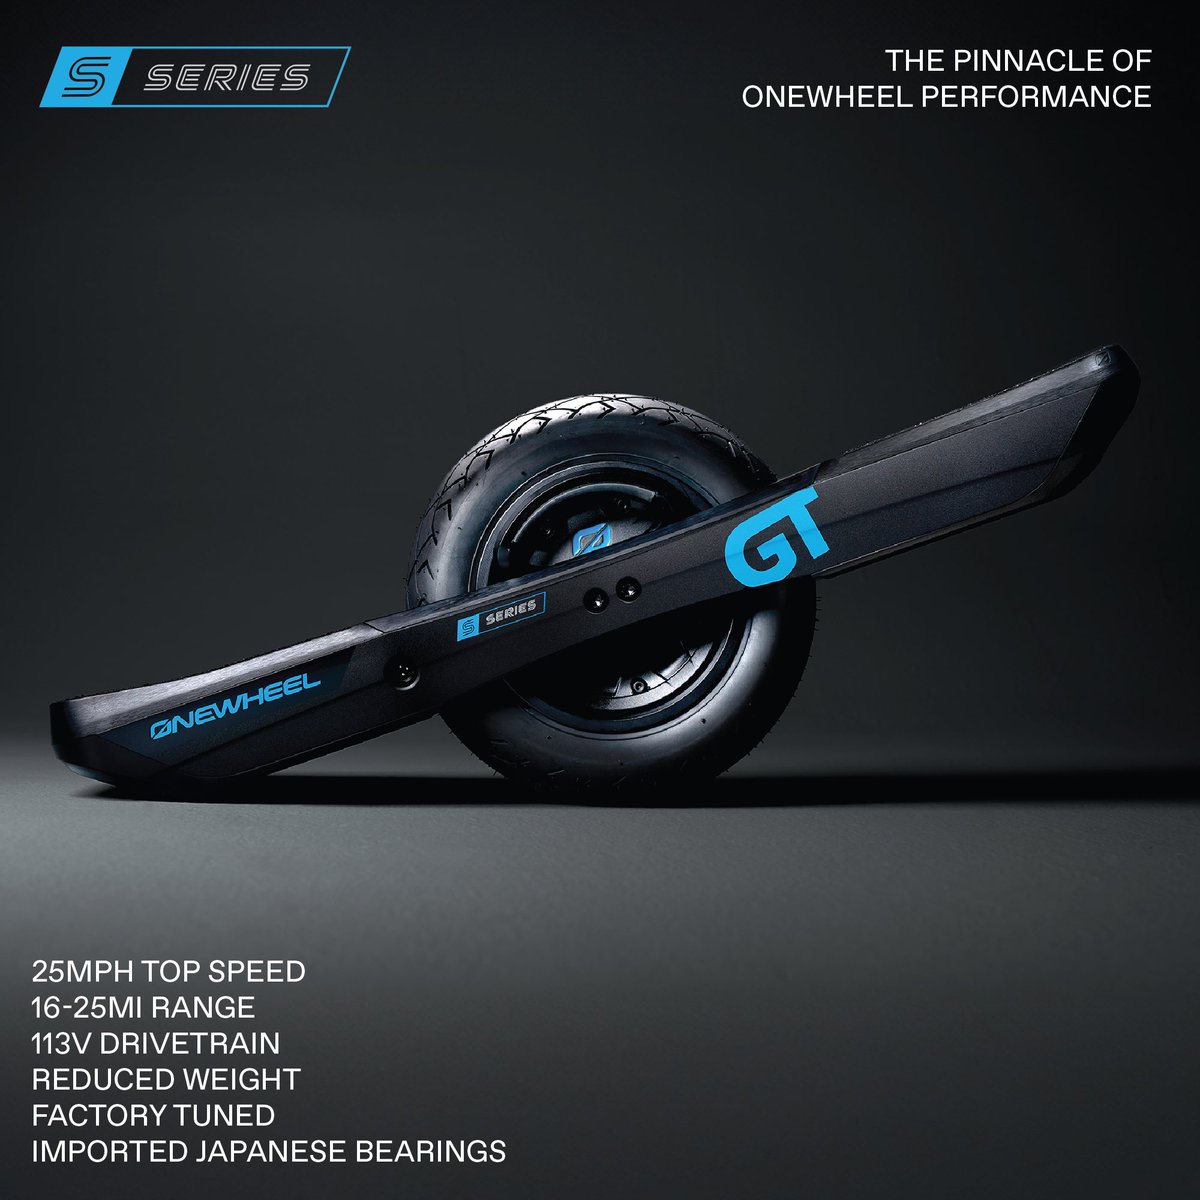 Introducing: Onewheel GT S-Series onewheel.com/pages/onewheel…